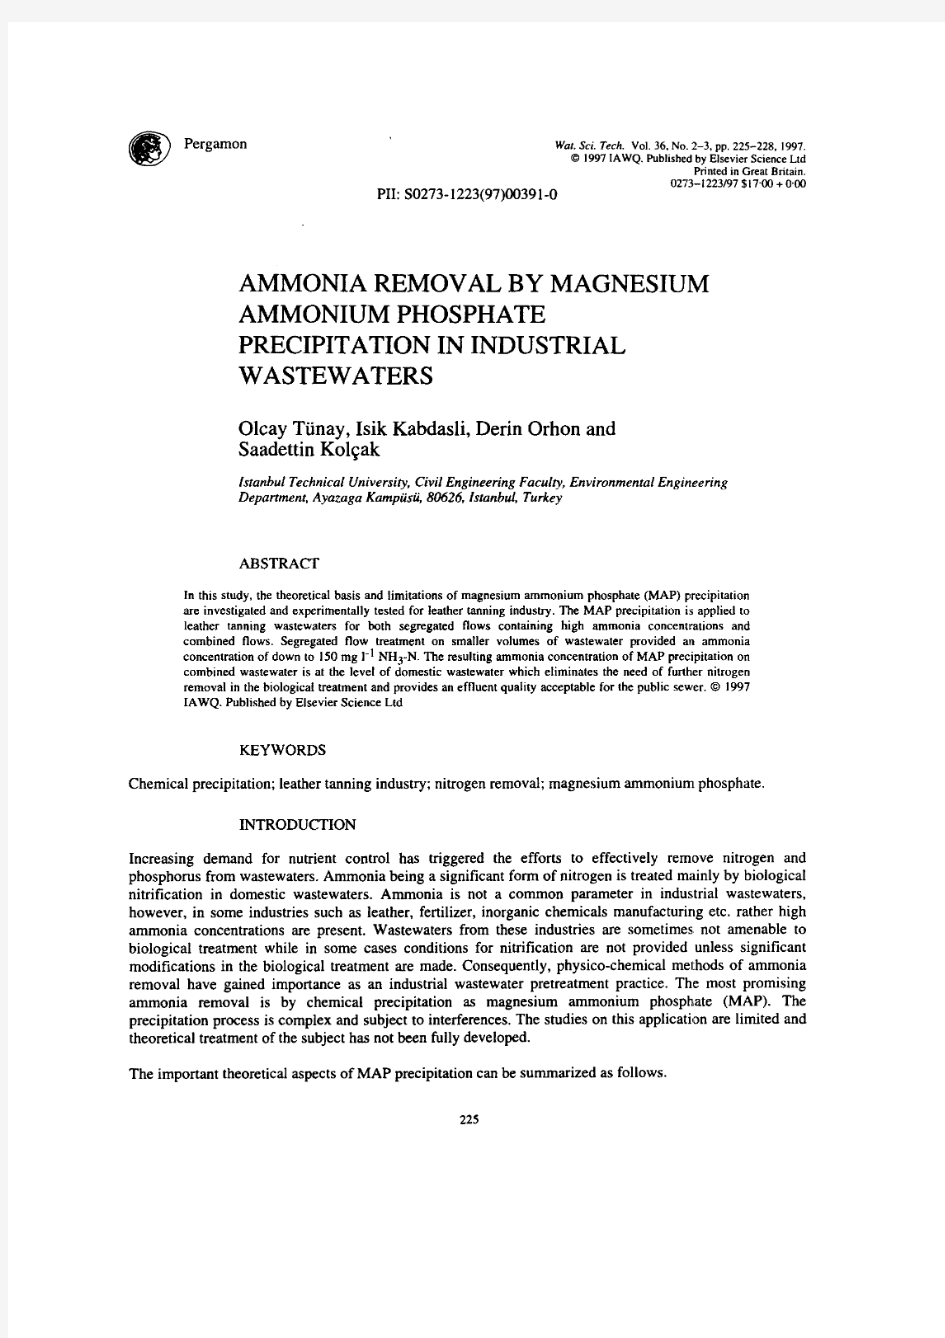 Ammonia removal by magnesium ammonium phosphate precipitation in industrial wastewaters